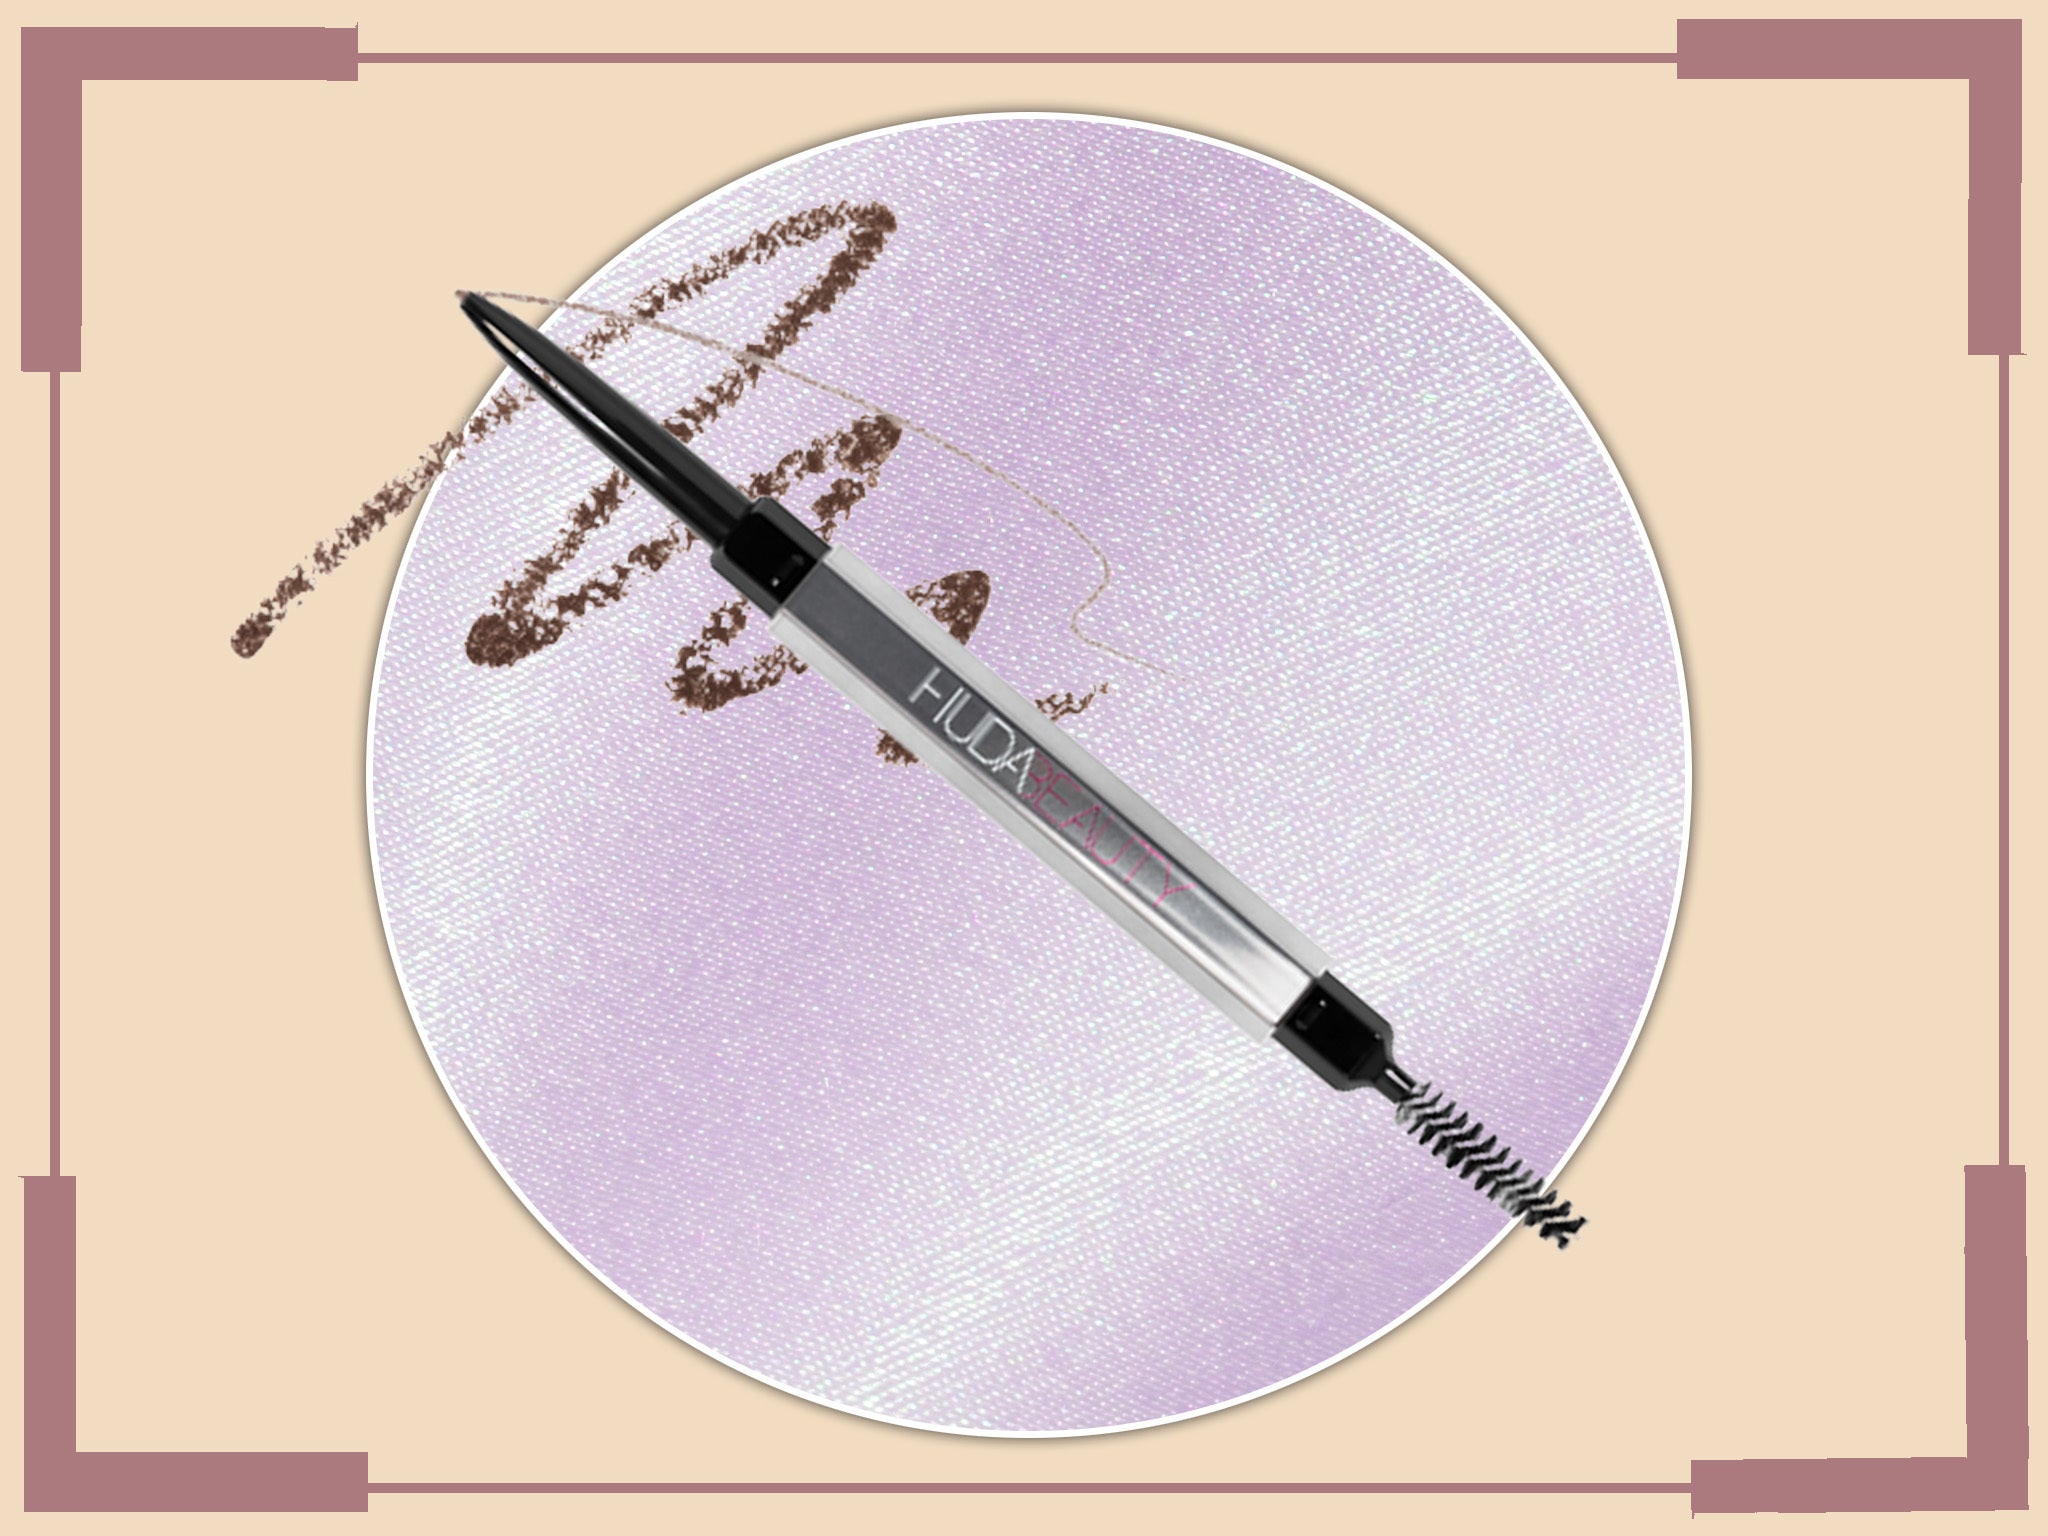 Available now, the brand claims it has the finest tip possible for a brow pencil